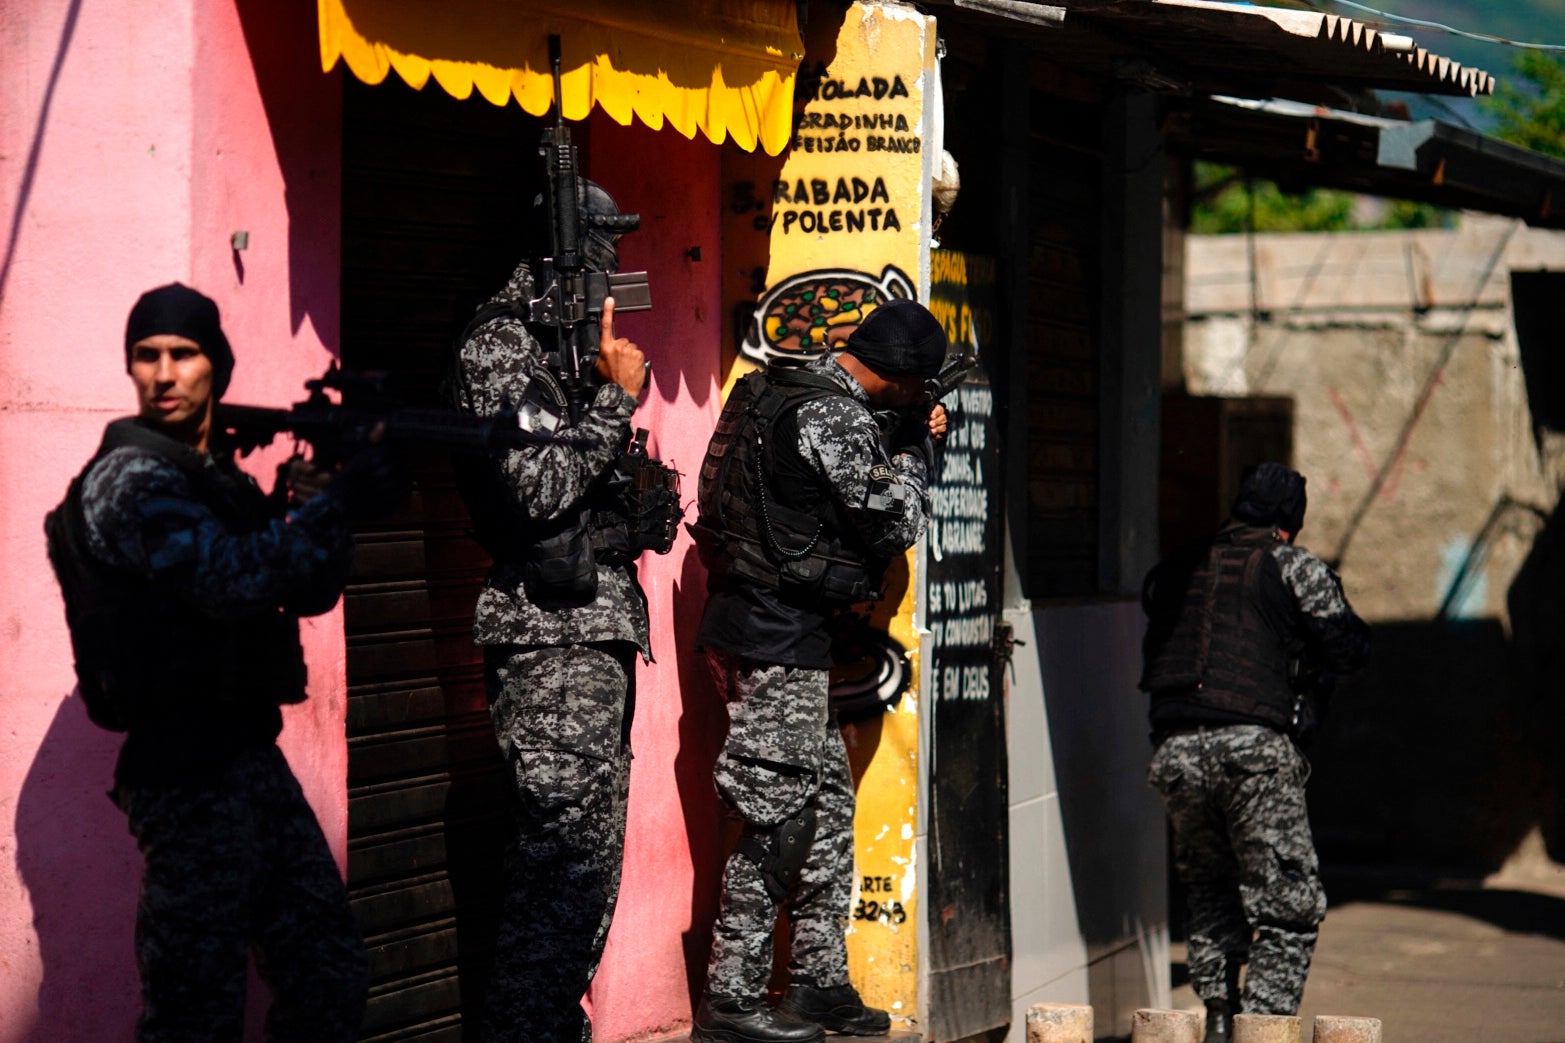 Police officers carry out a raid against drug traffickers in the Jacarezinho area of Rio de Janeiro